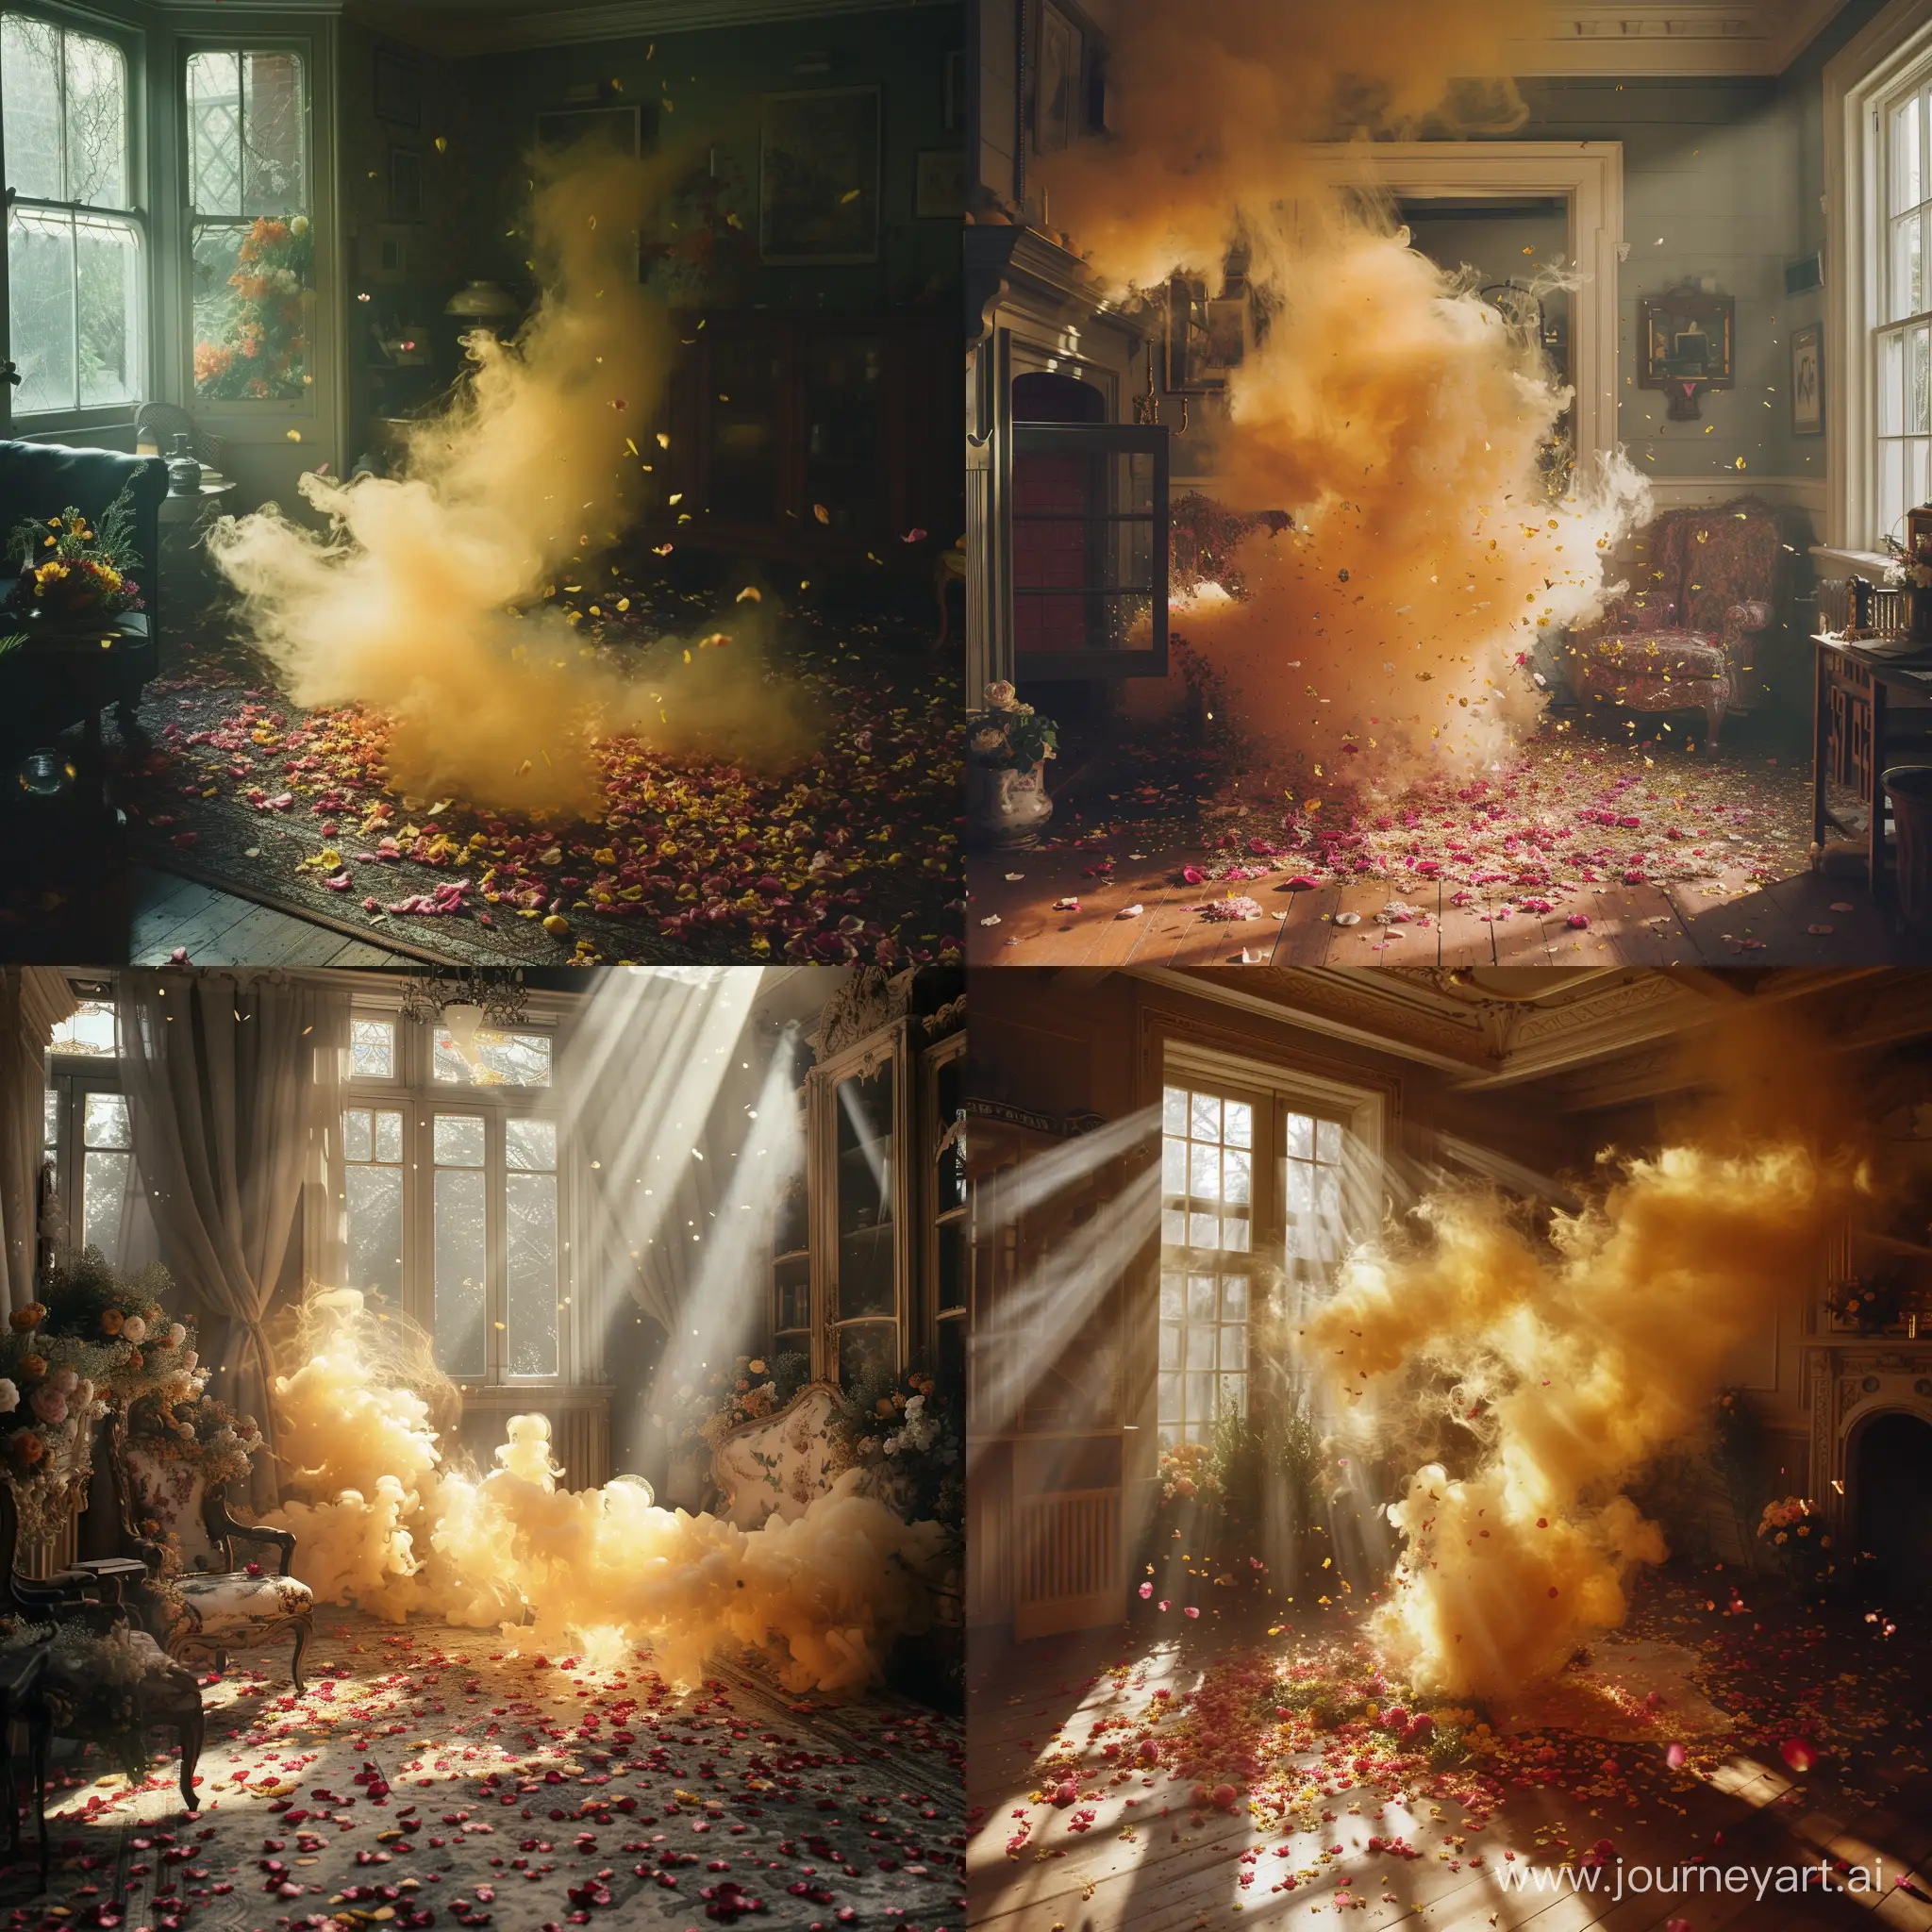 Victorian-Man-in-a-Cozy-Room-with-Golden-Smoke-and-Flower-Petals